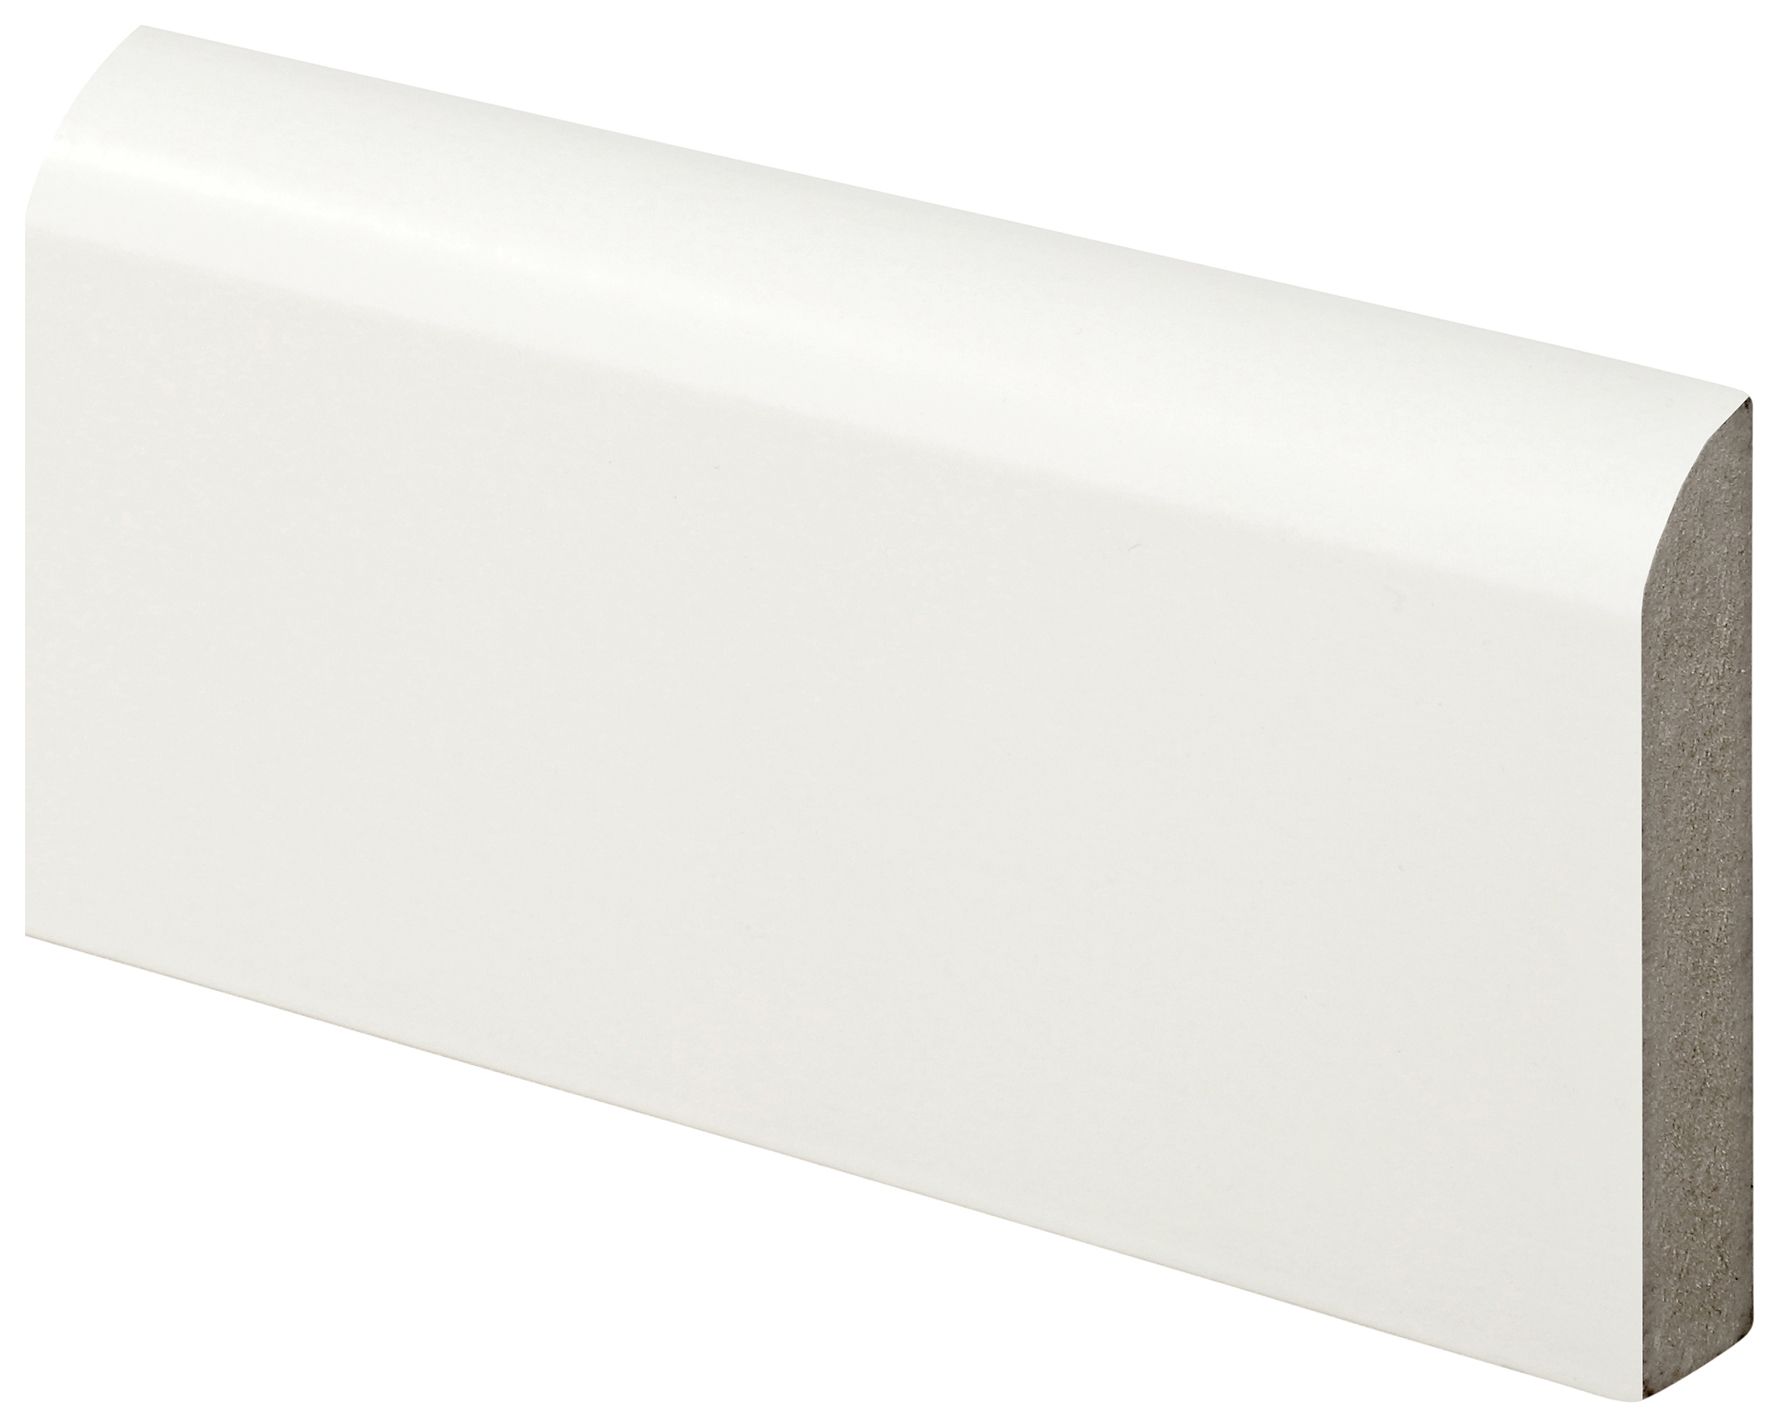 Image of Wickes Bullnose Fully Finished Architrave - 18 x 69 x 2100mm